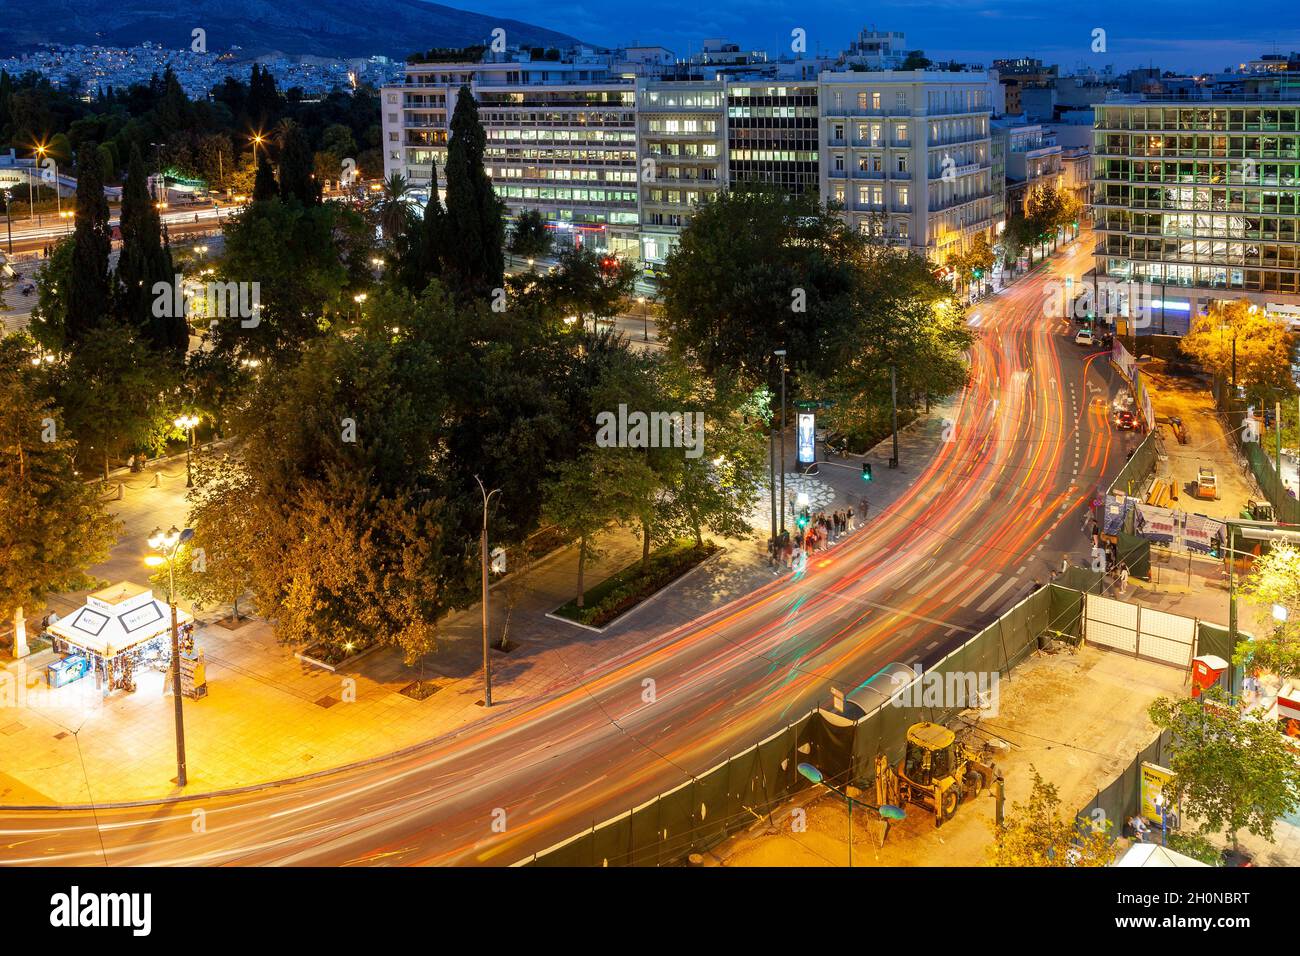 Syntagma Square, night view of the most iconic square of Athens, with car trails during the blue hour. At the right there are reform works undergoing. Stock Photo